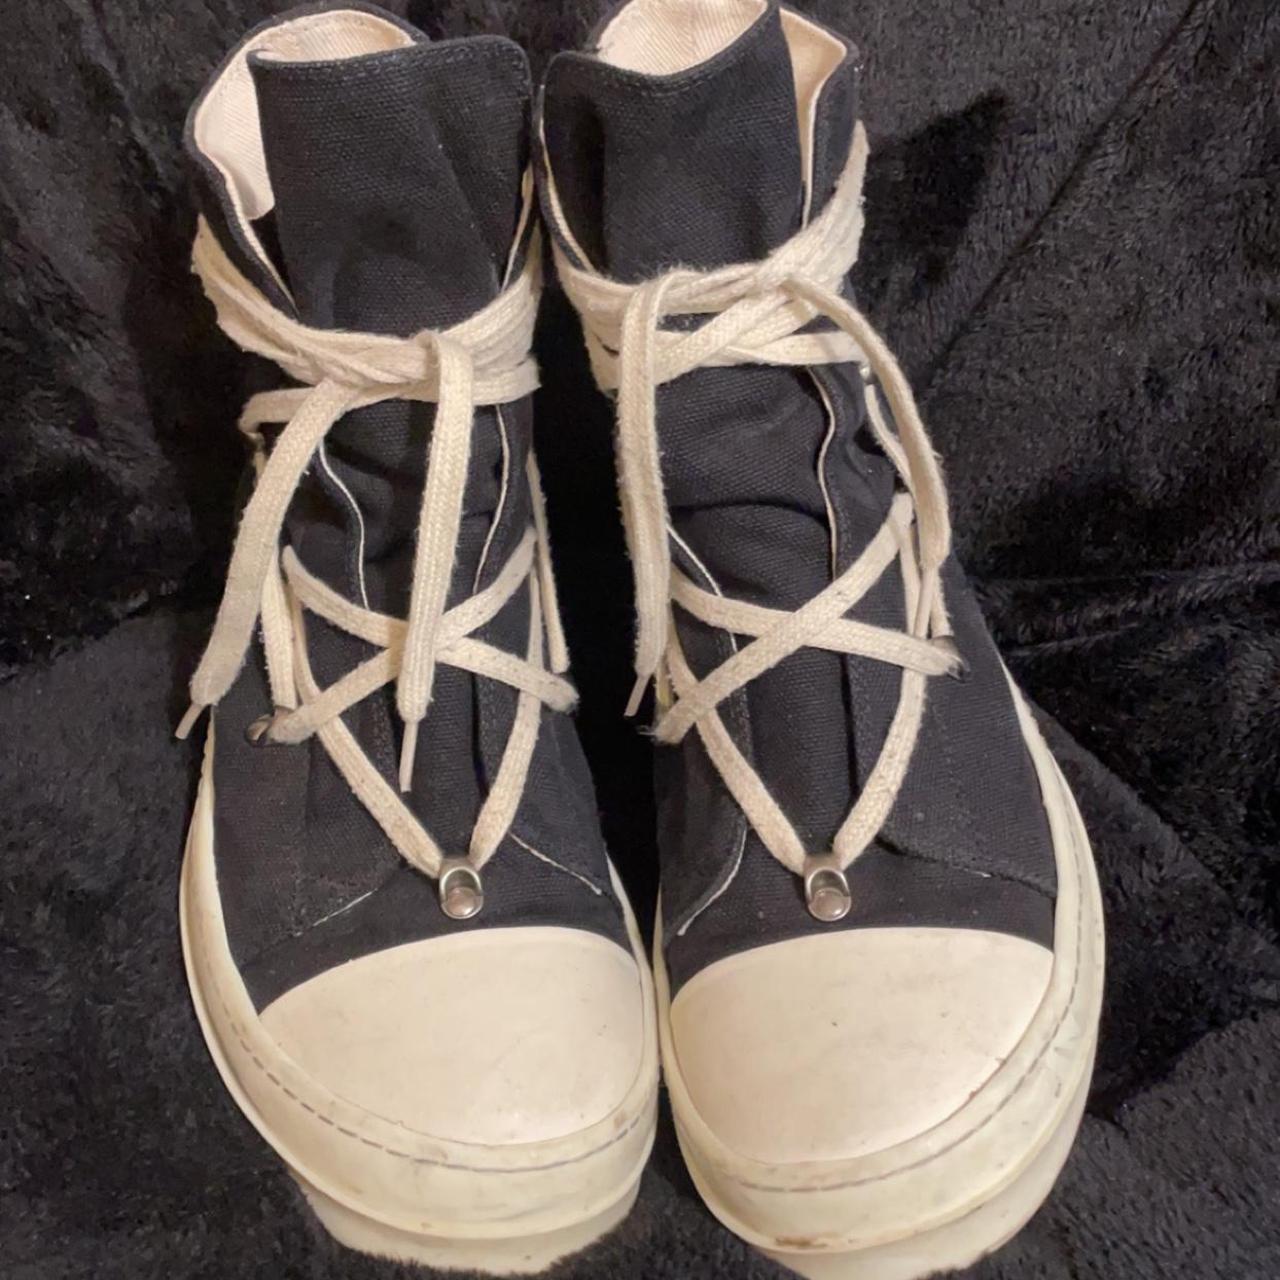 Rick owens size 11 not really sure what these are... - Depop